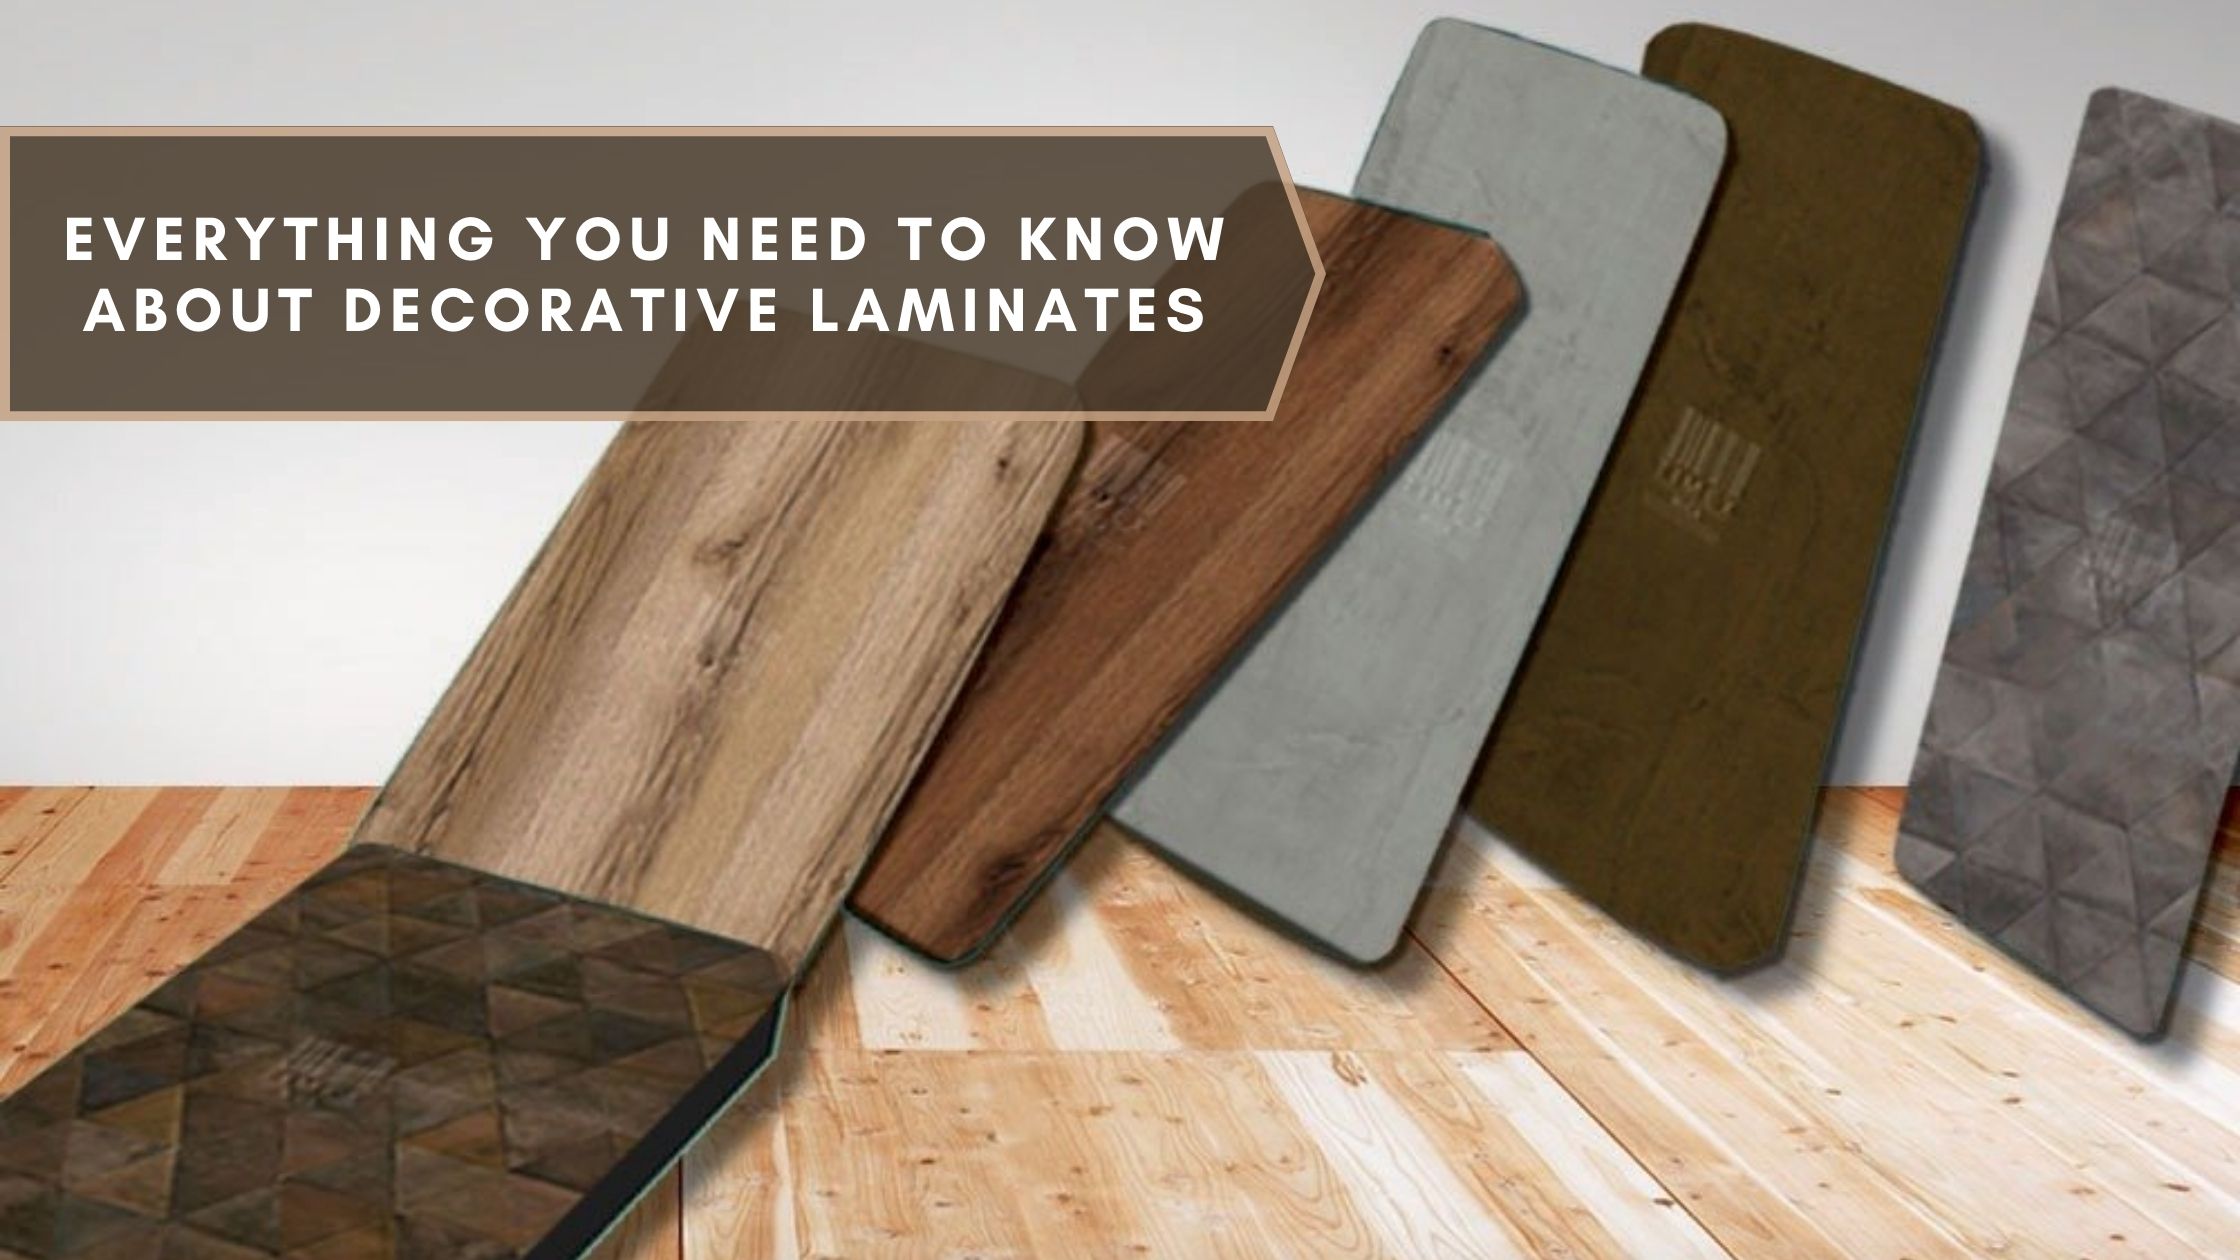 Everything You Need to Know About Decorative Laminates